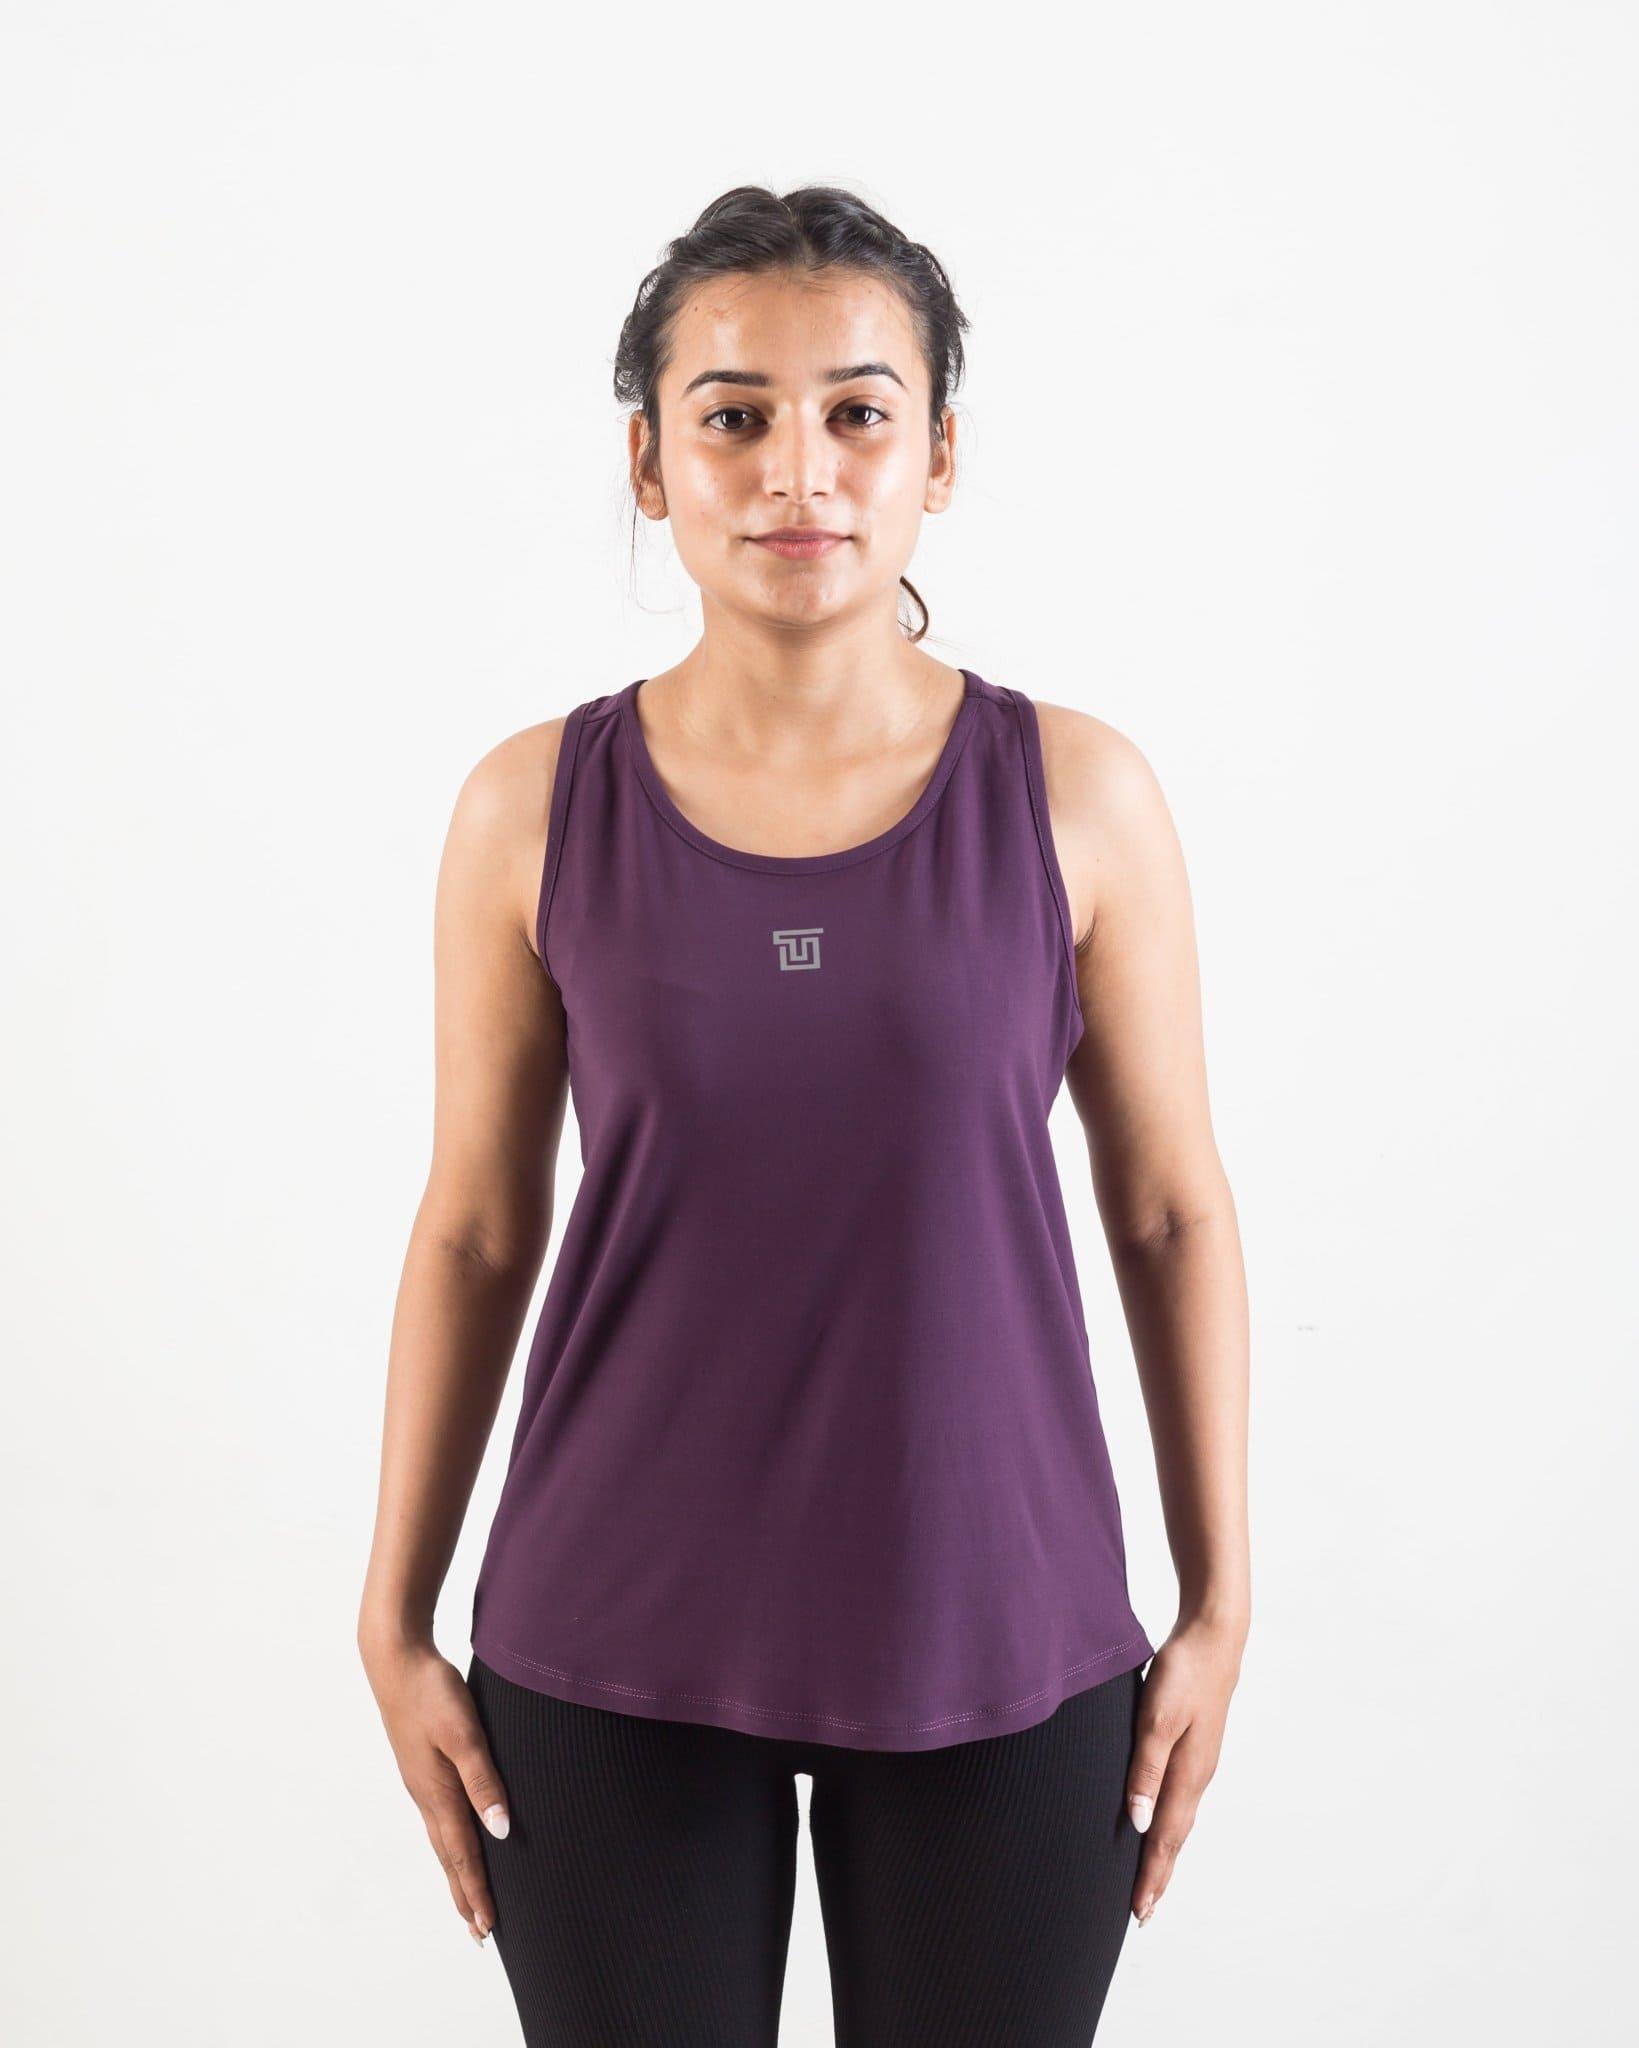 Untrain Women's Training Tank Tops for Exercise & Fitness Workouts – UNTRAIN